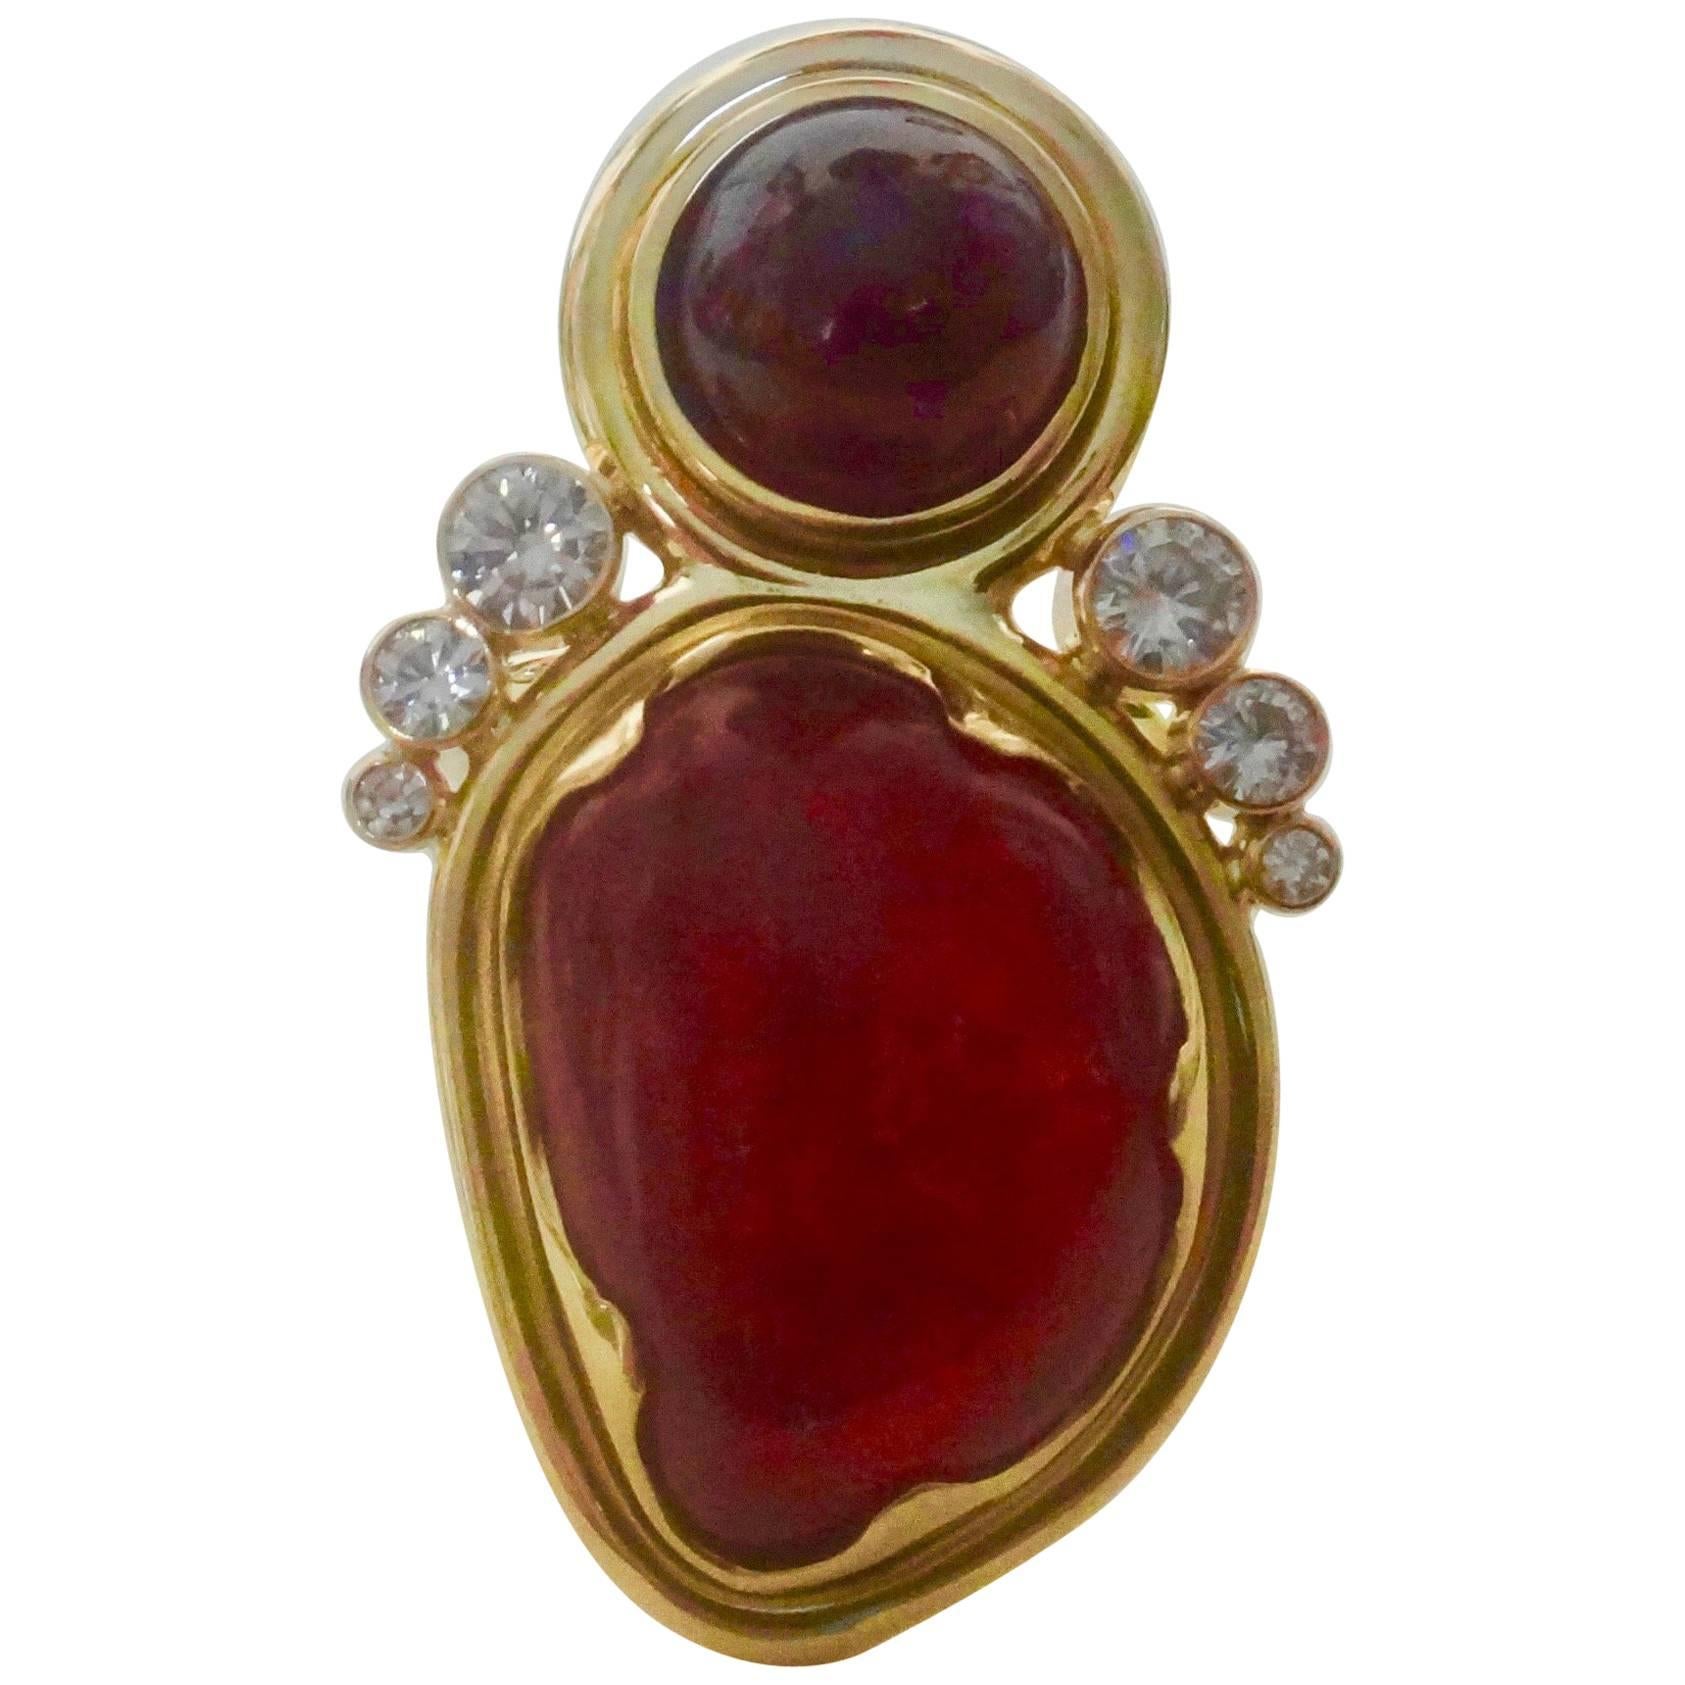 A gem quality cabochon Rhondonite (origin: Sweden) is featured in this dramatic cocktail ring.  The jewel is an intense pink color with some inclusions typically found in cabochon cut gems.  The rhondonite is complimented by a deep red, round cut,